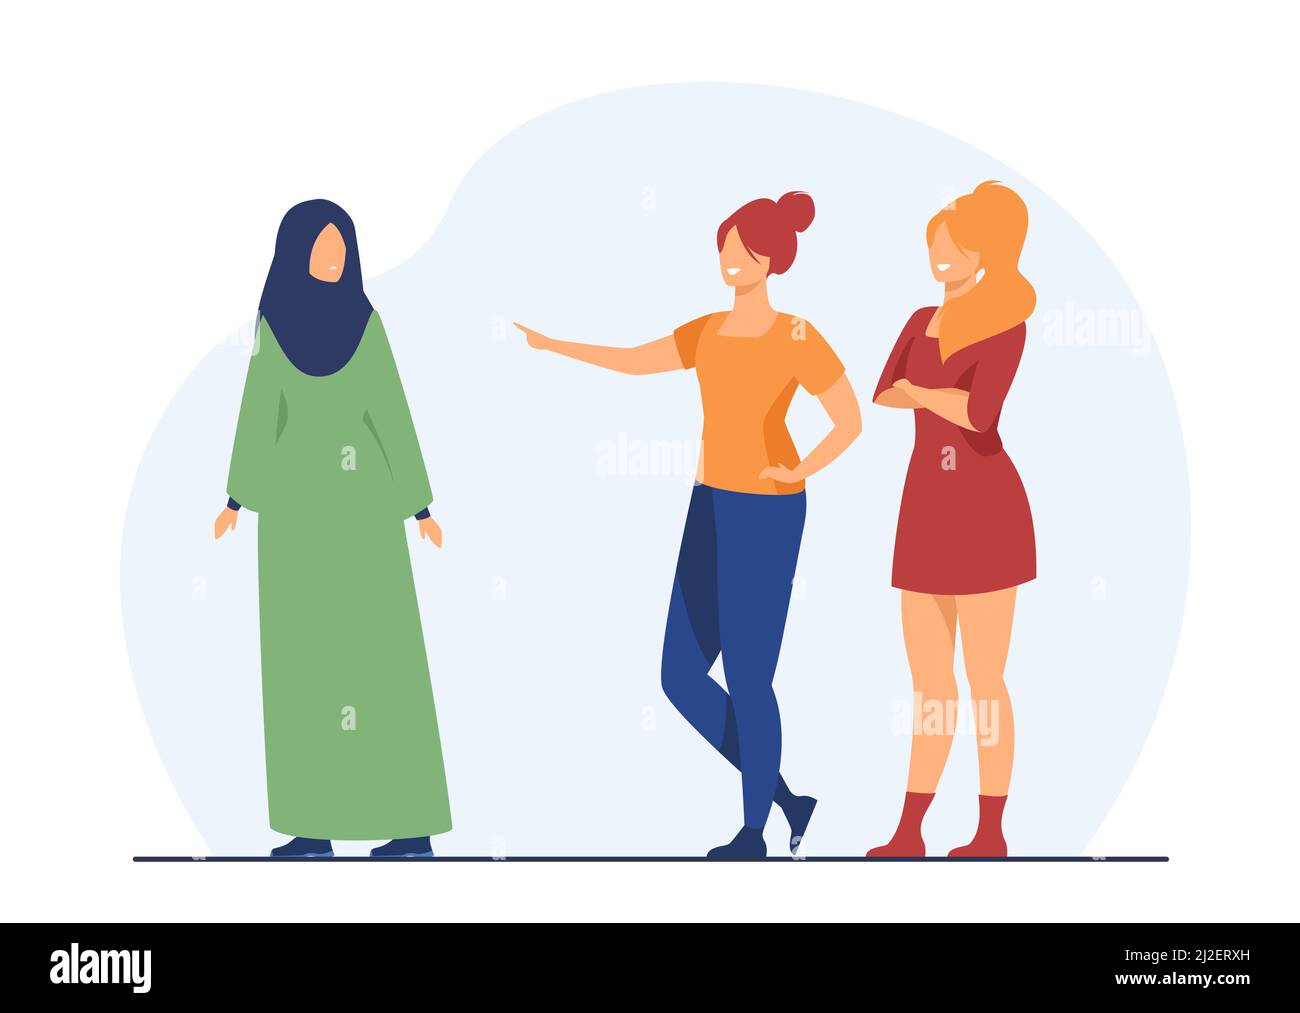 Girls bullying Muslim classmate. Shaming, teasing, minority. Flat vector illustration. Social problem, violence, cultural difference concept for banne Stock Vector